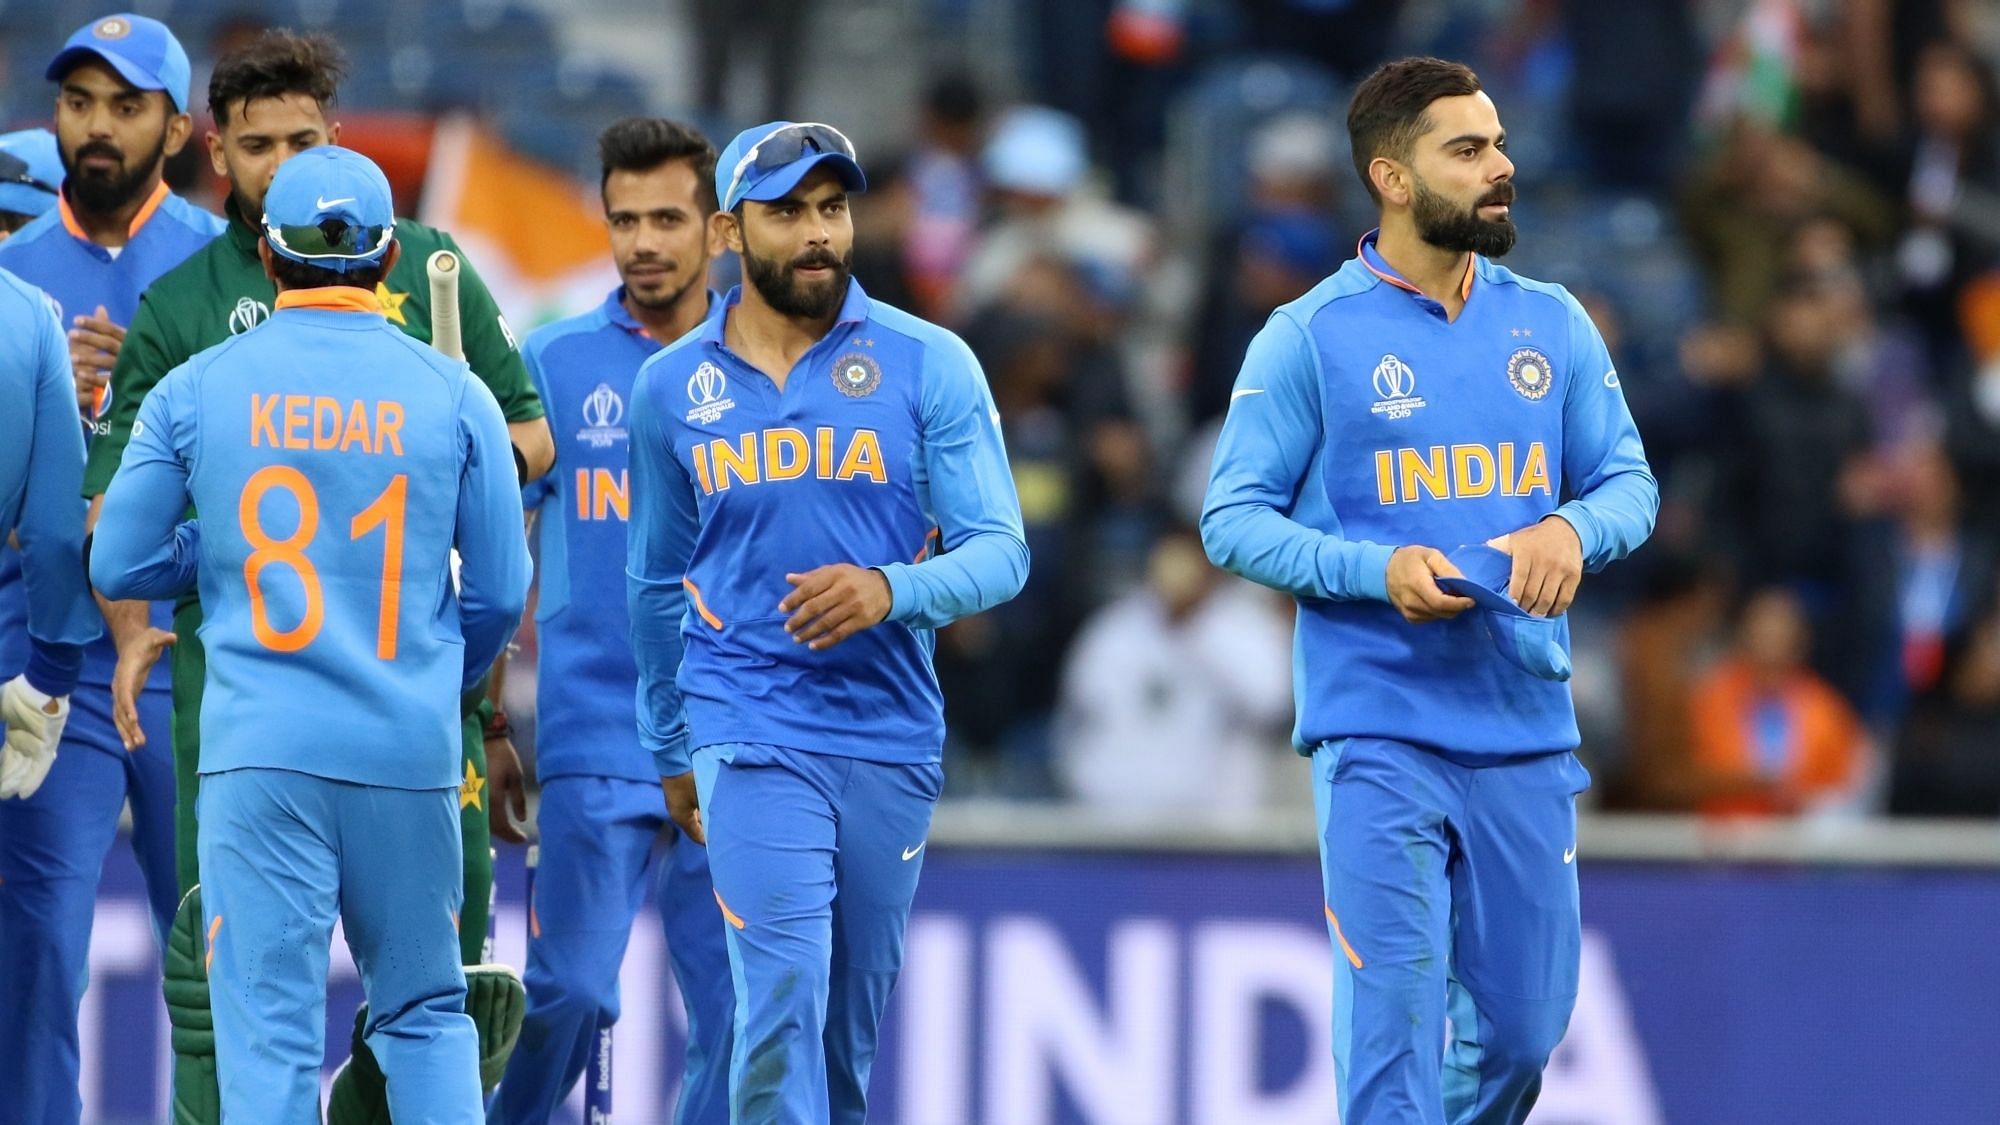 Watch highlights of India’s 89-run win over Pakistan in the 2019 ICC World Cup.&nbsp;